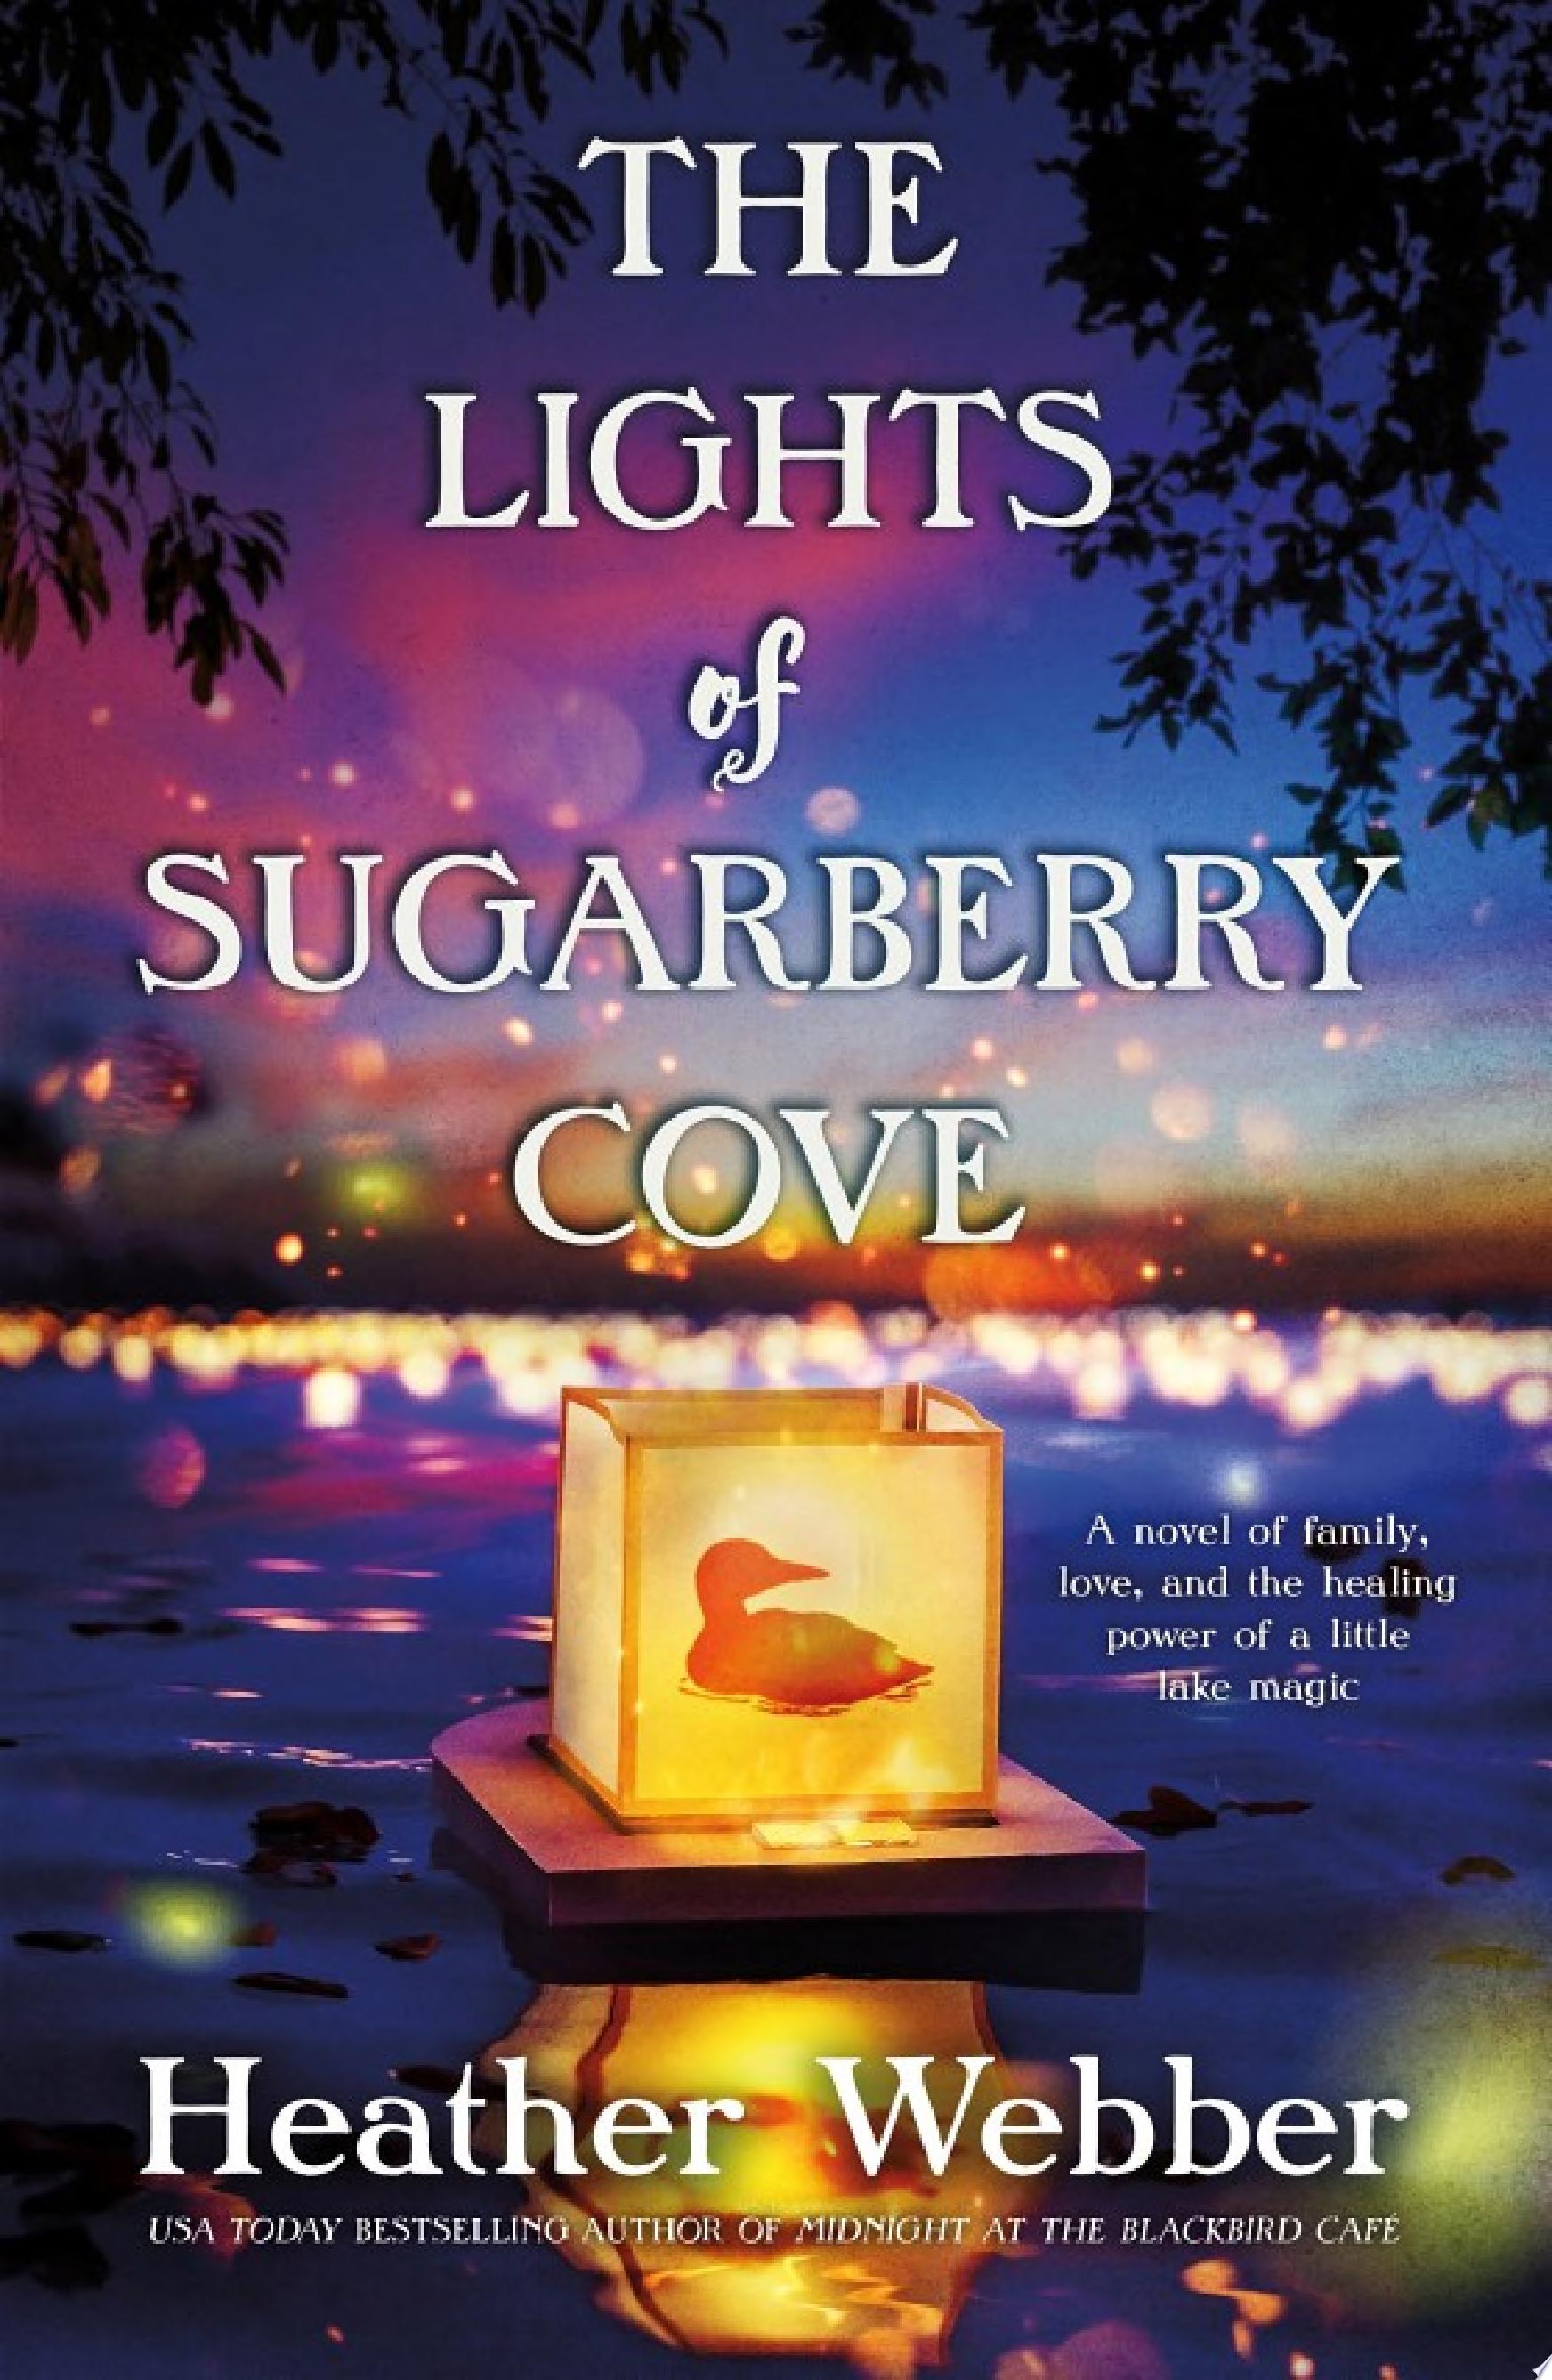 Image for "The Lights of Sugarberry Cove"